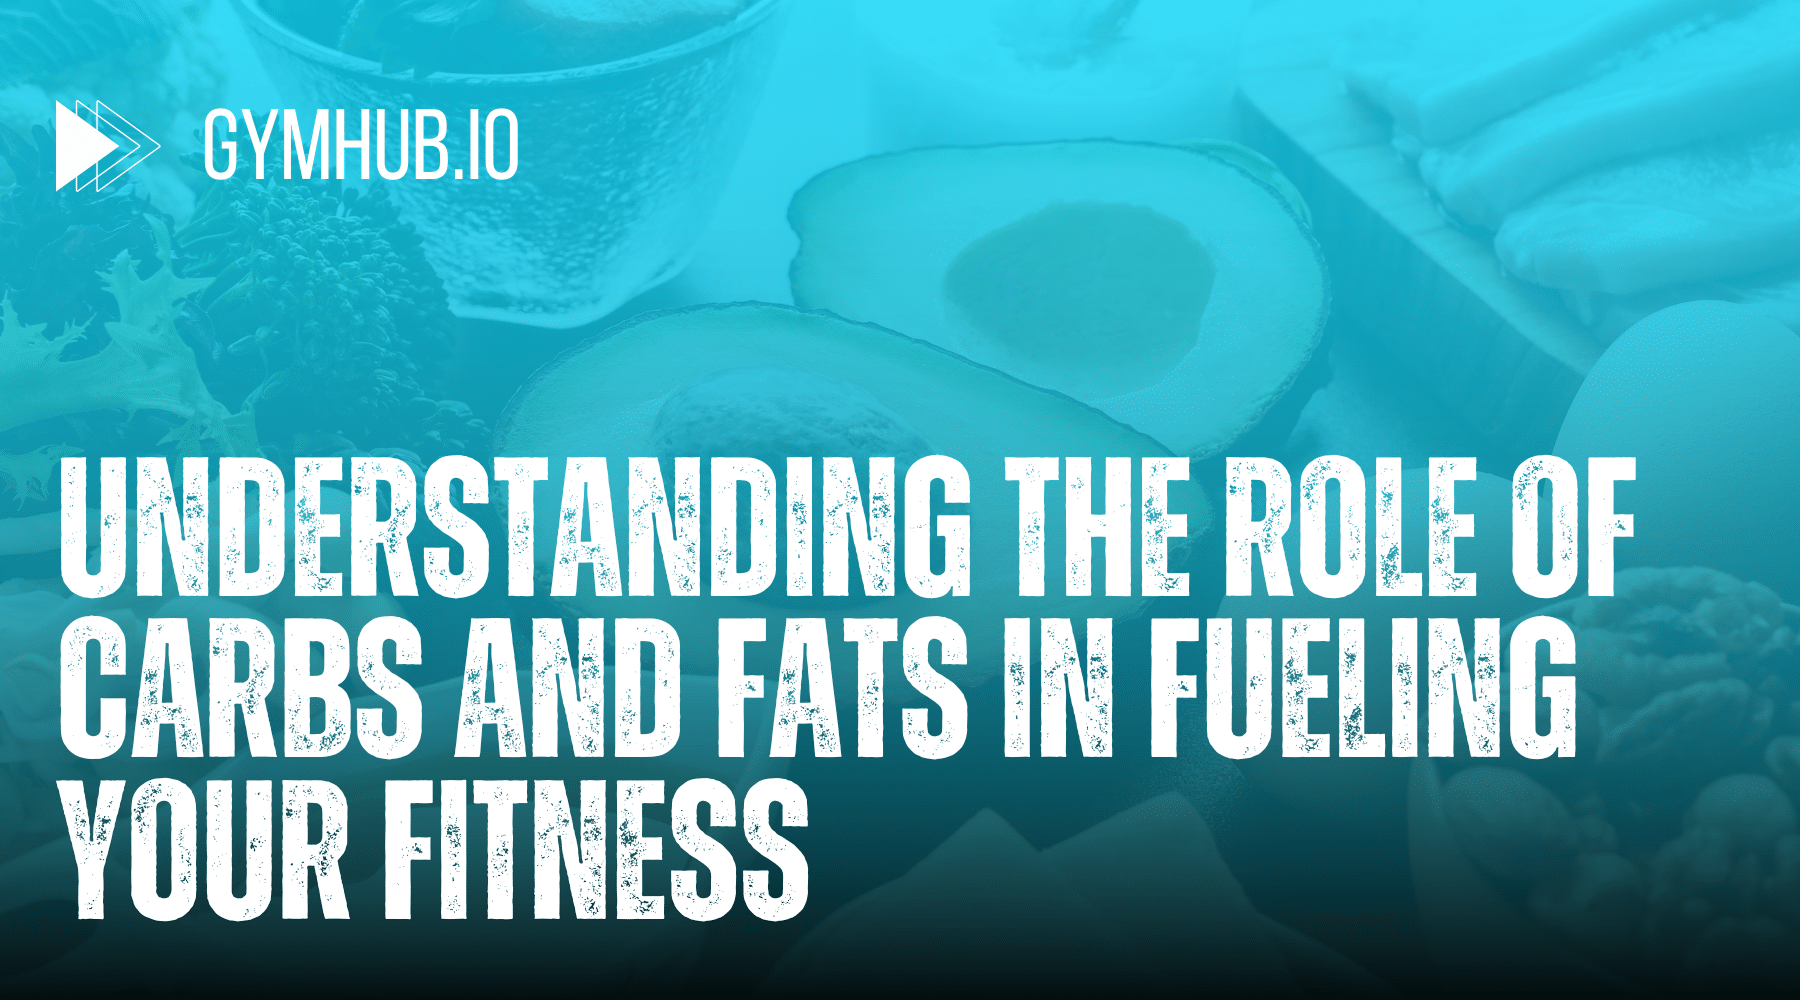 Understanding the Role of Carbs and Fats in Fueling Your Fitness